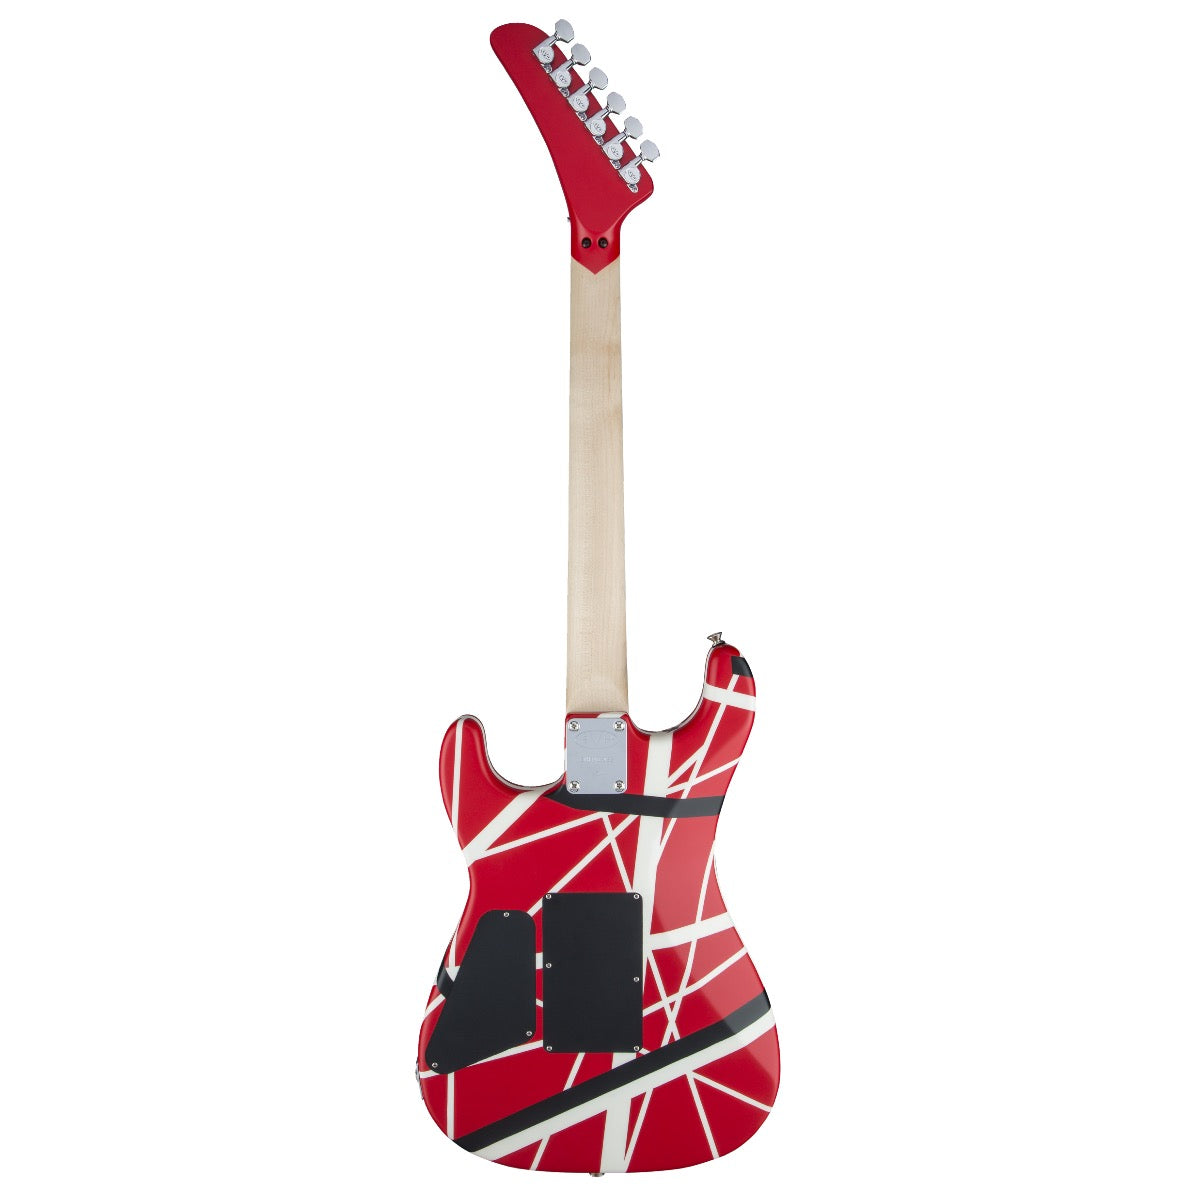 Series　White　5150®　Alto　Red,　Music　Stripes　Electric　Guitar　–　Black　and　EVH　Striped